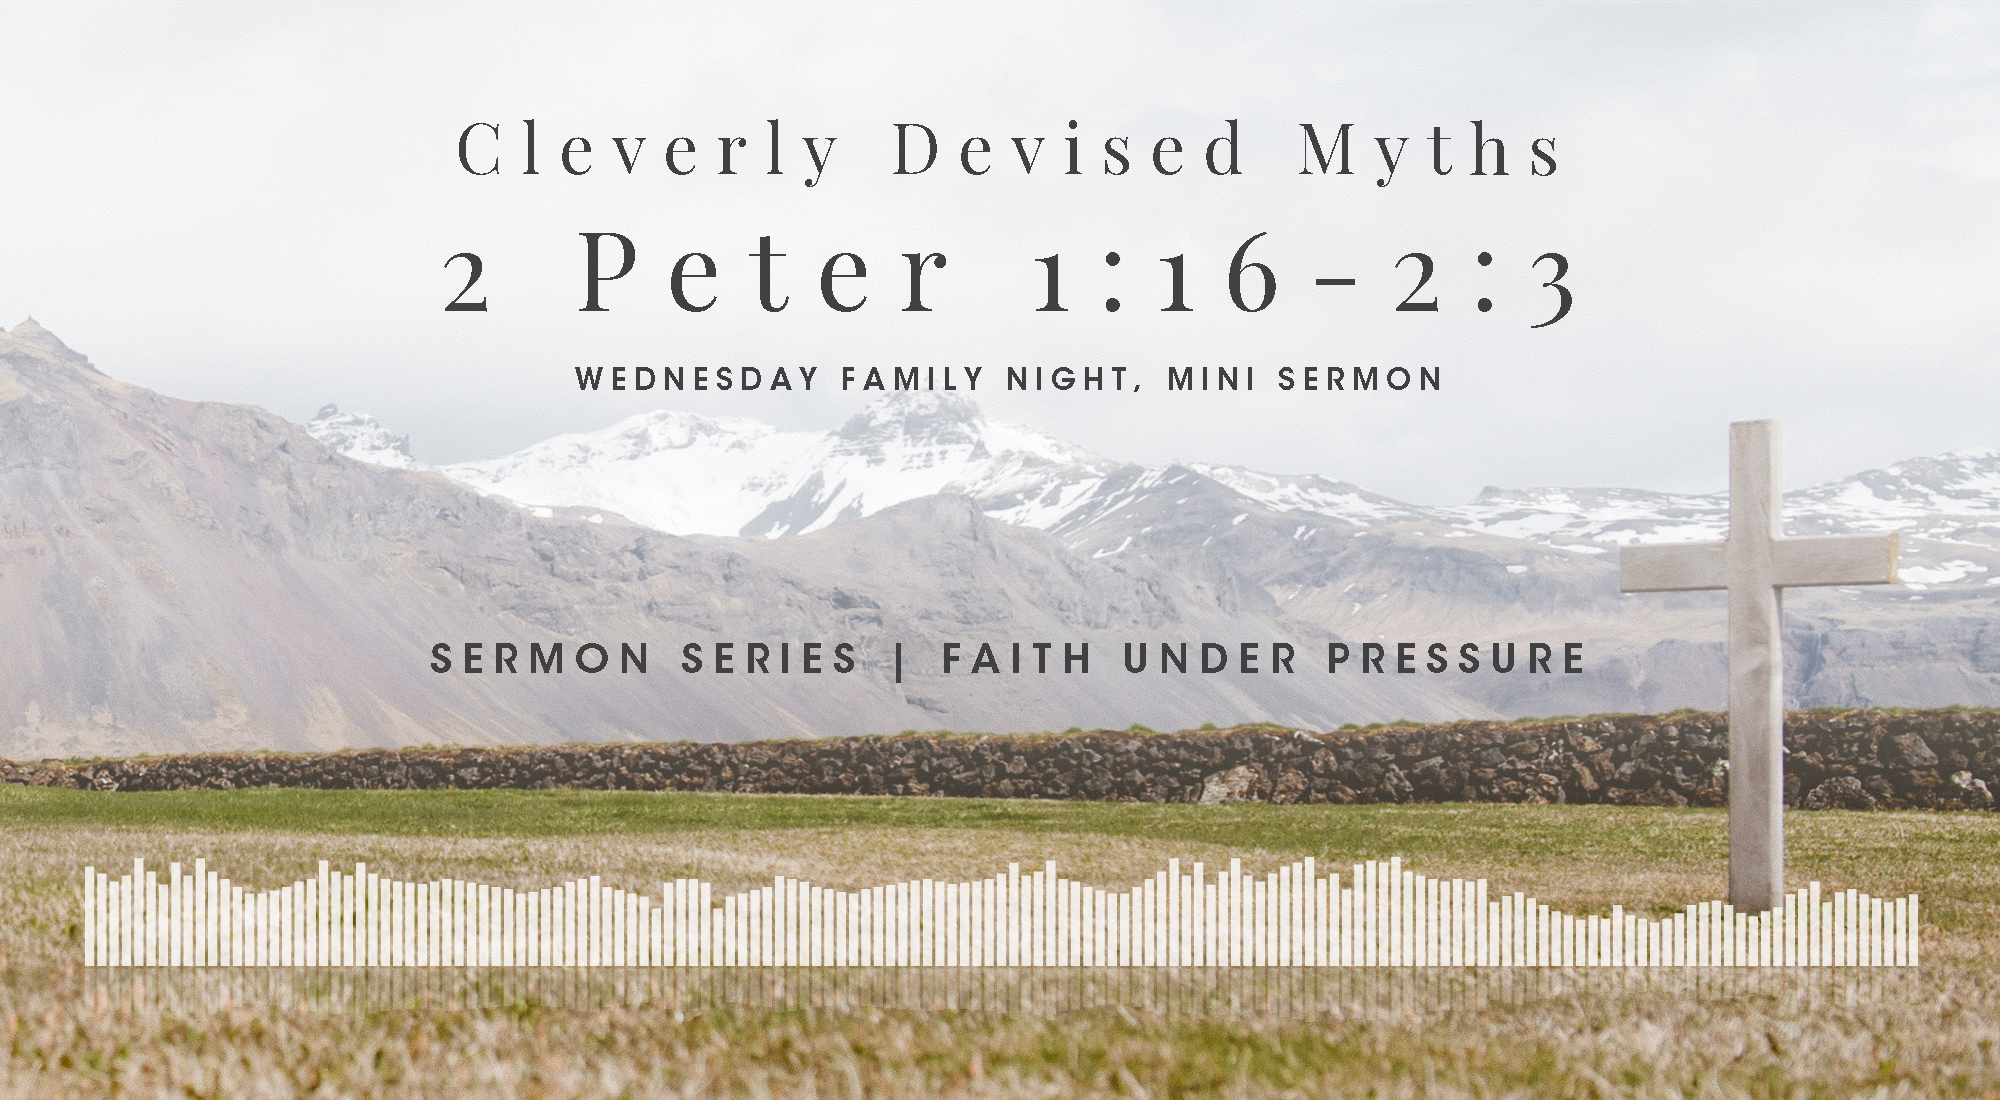 Cleverly Devised Myths 2 Peter 1 16 2 3 Wyandotte County Christian Church